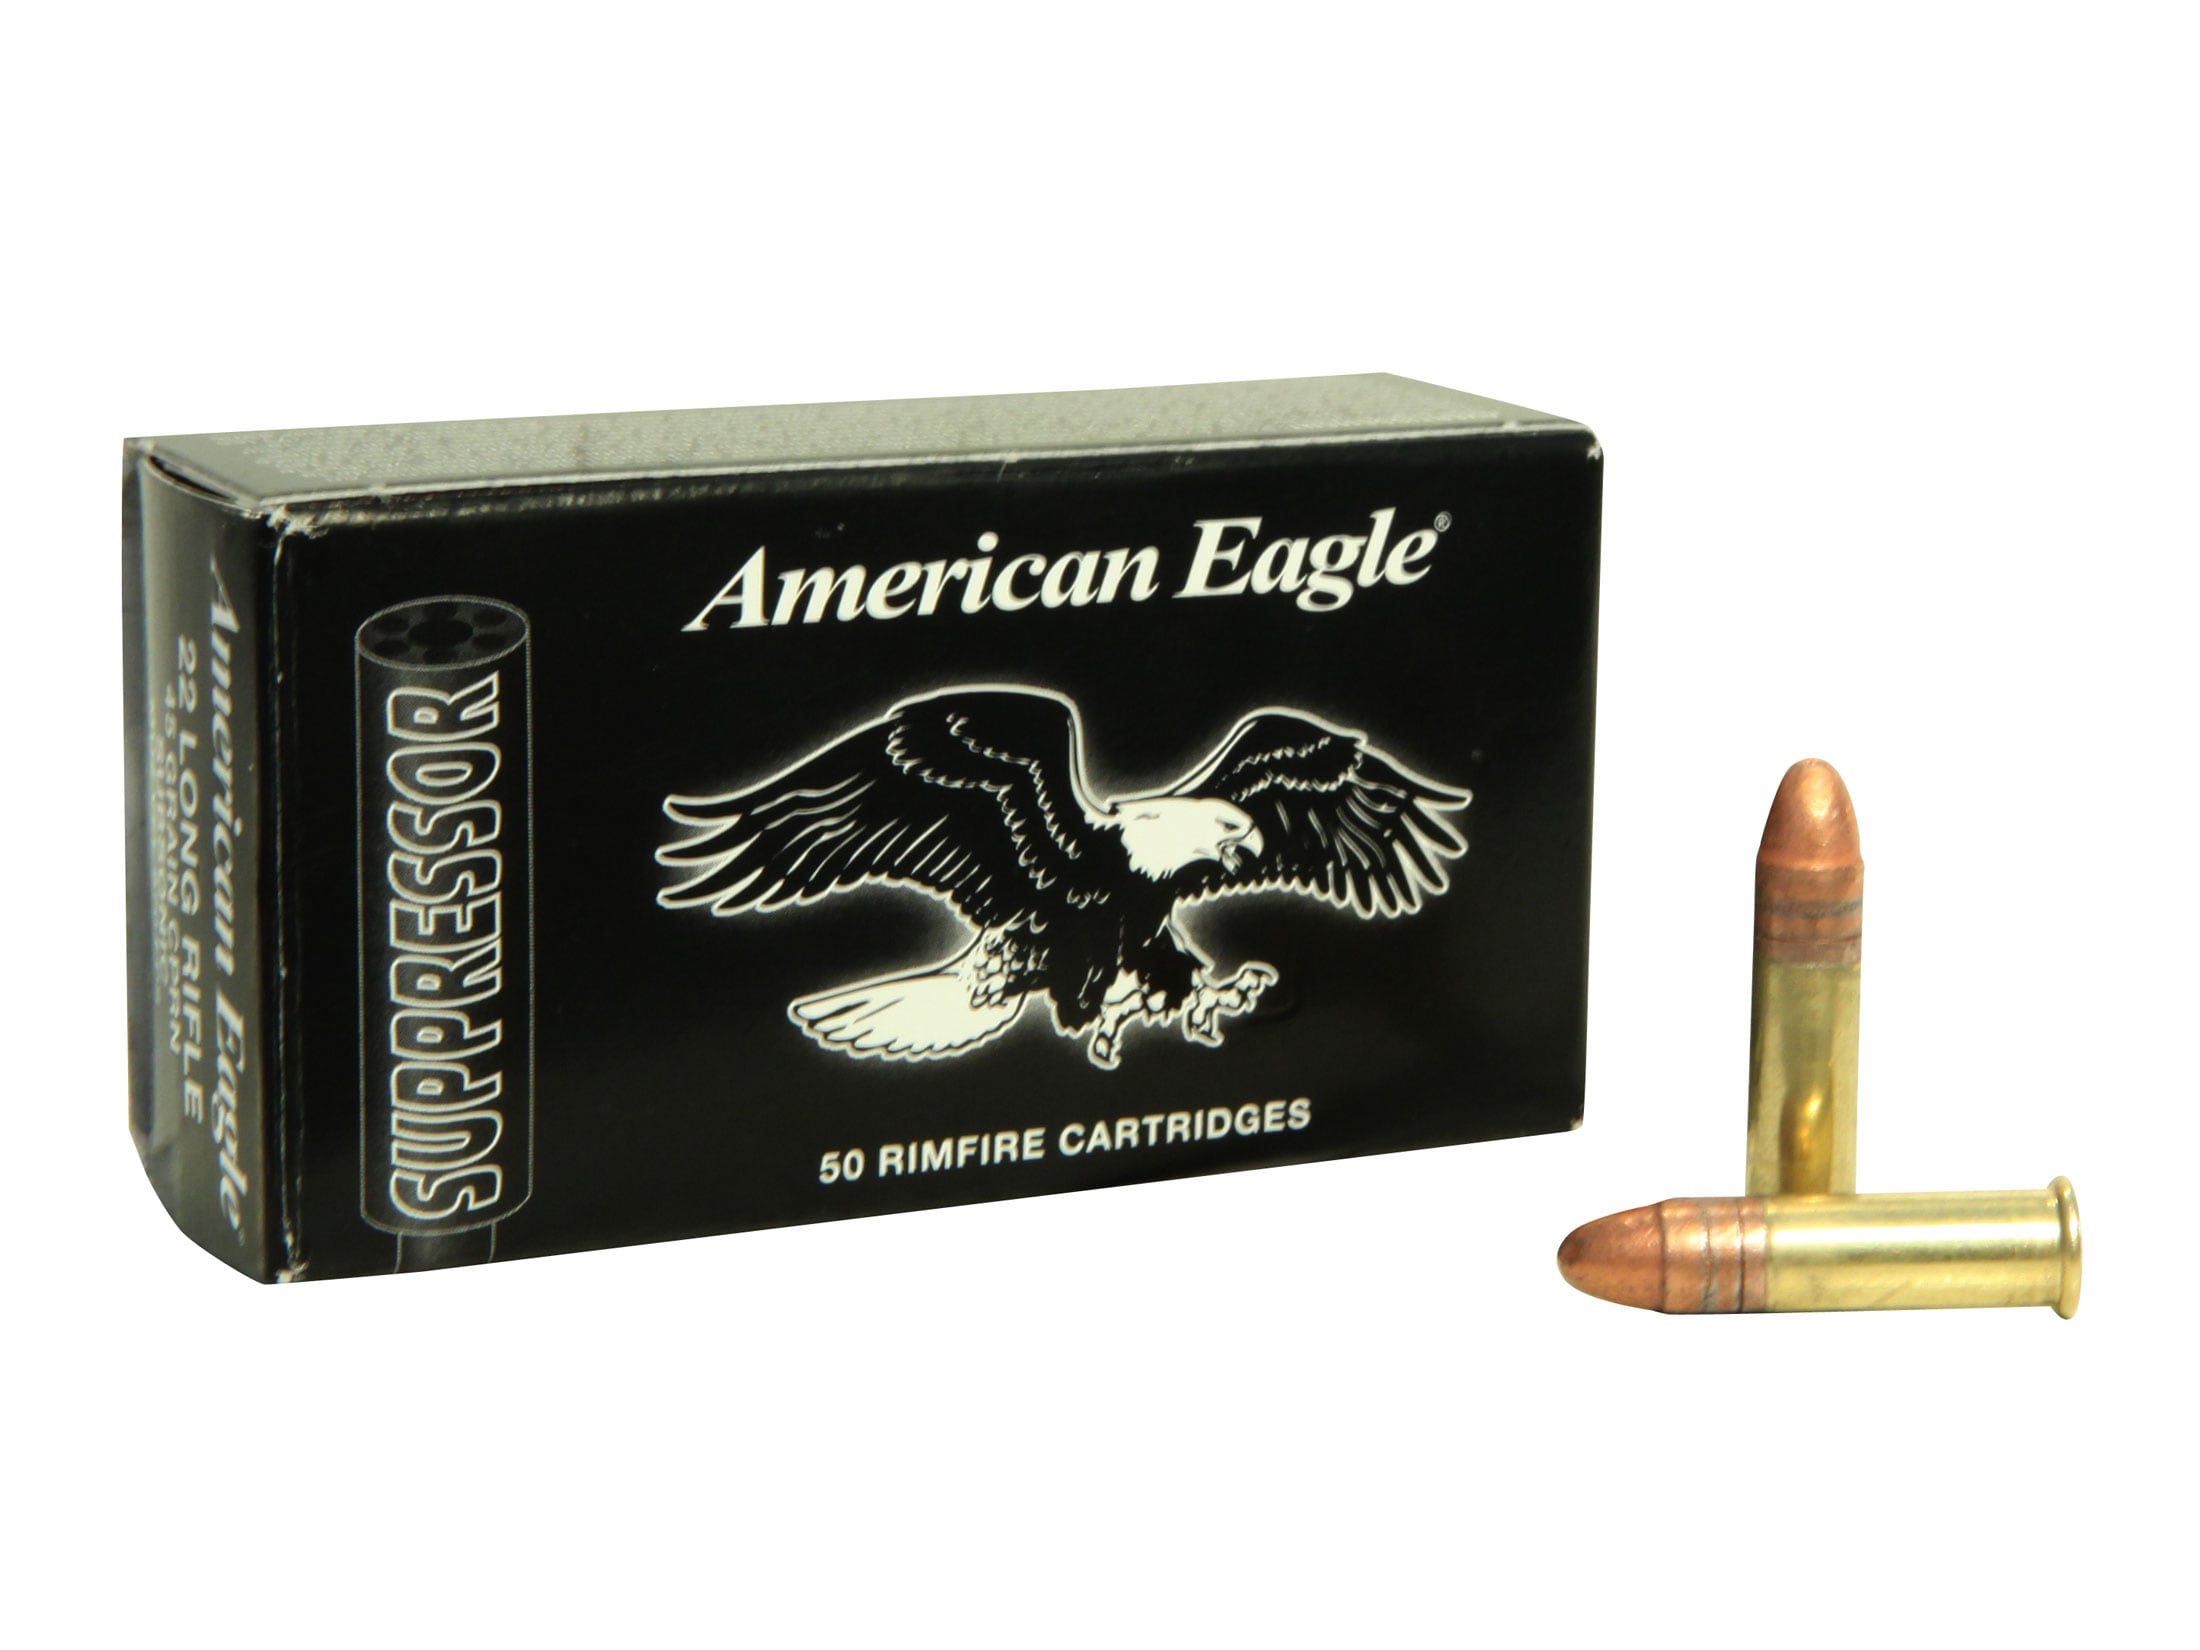 Buy American Eagle Rifle for USD 37.99